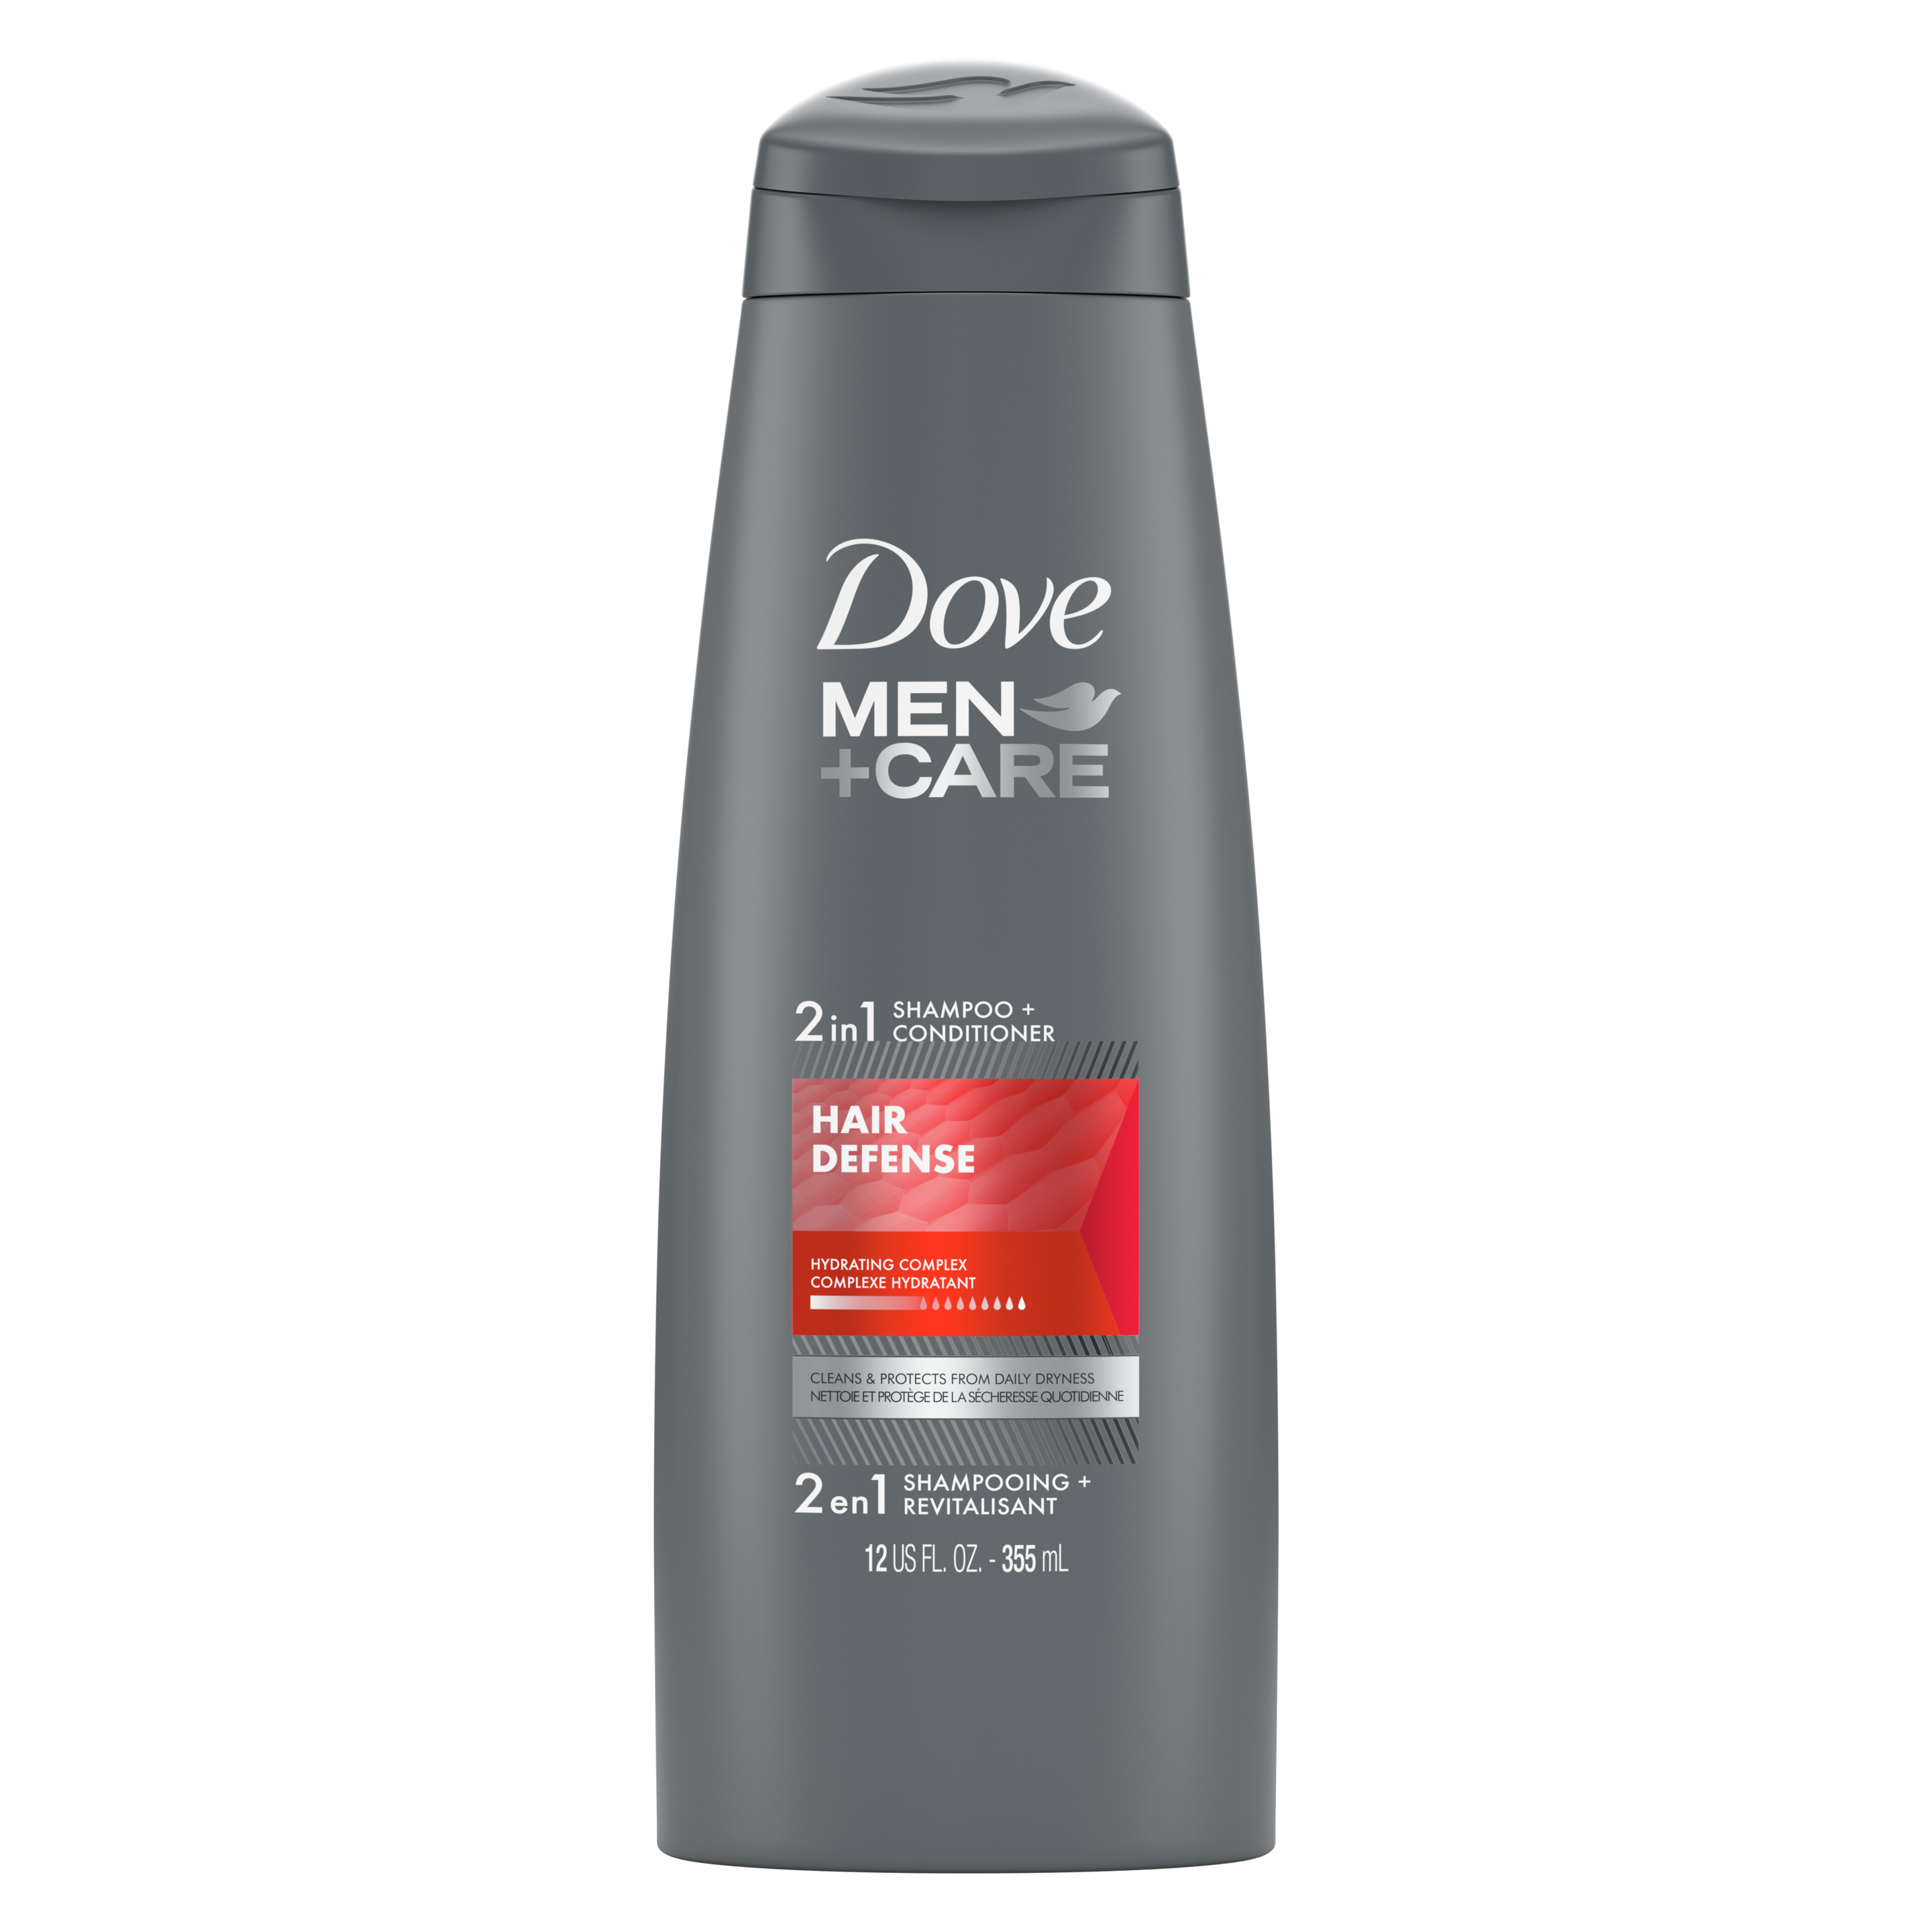 Dove Men+Care Hair Defense 2-in-1 Shampoo + Conditioner 12oz Front of Pack